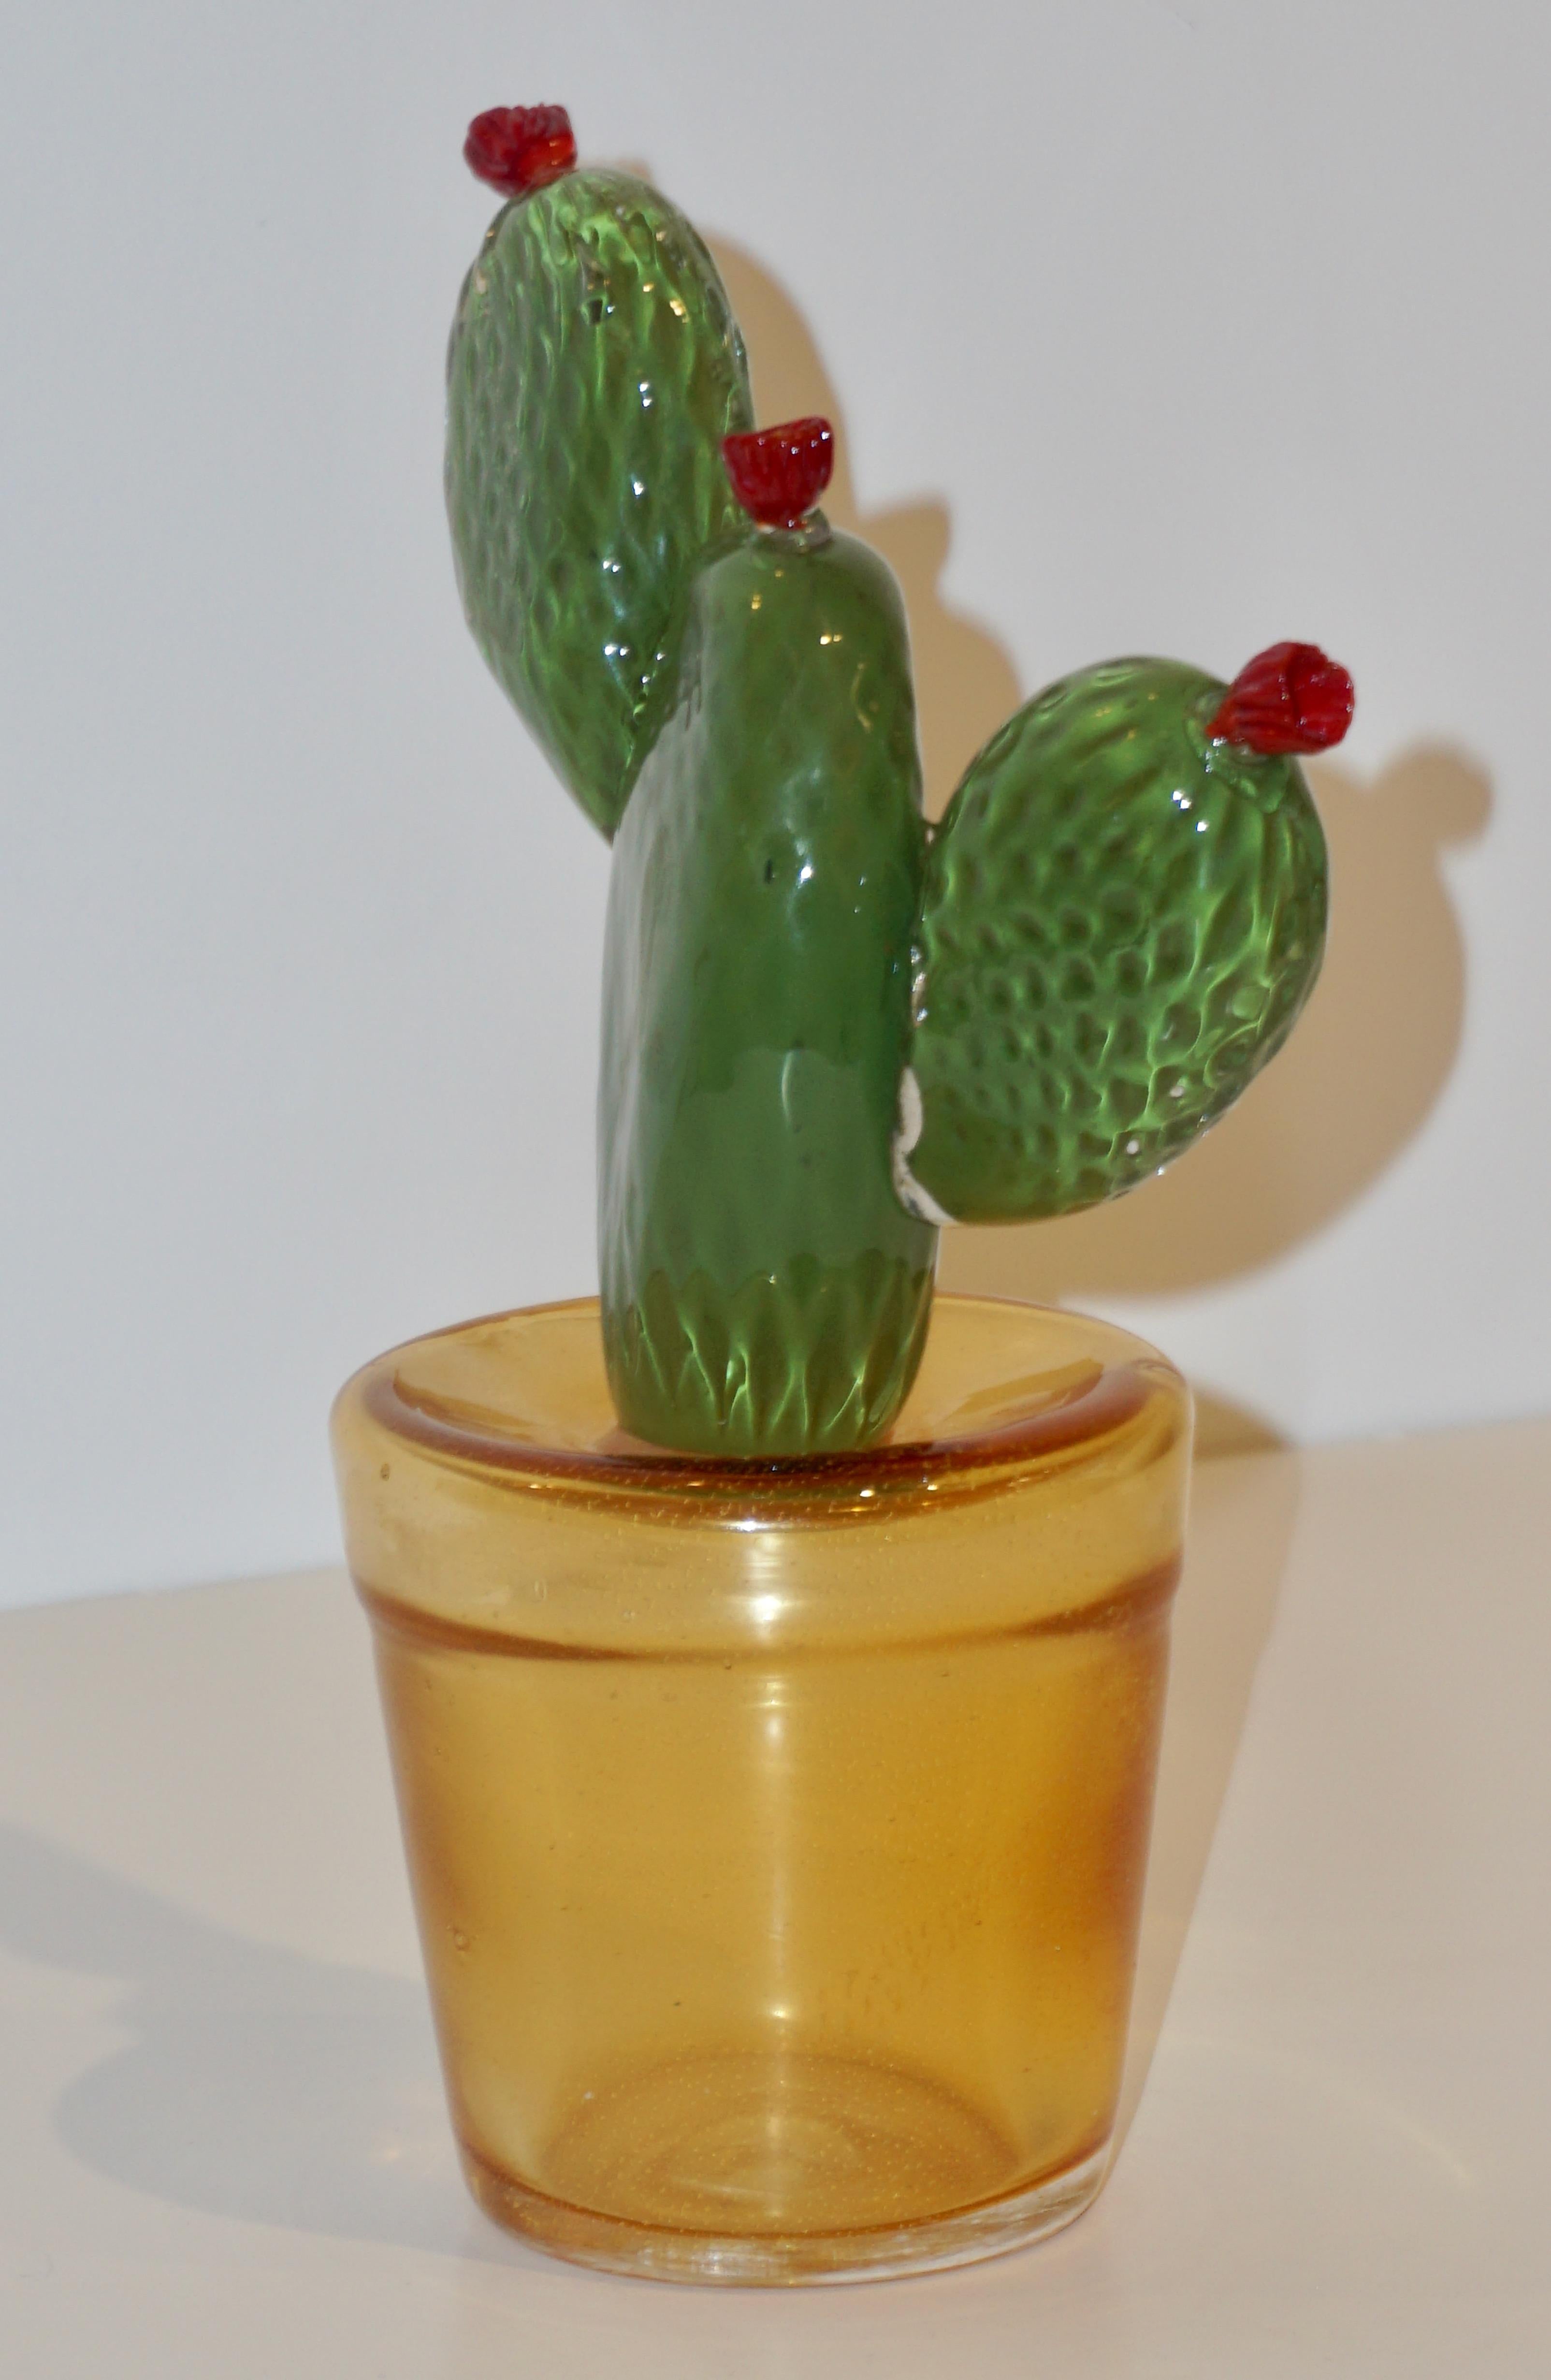 1990s Vintage Italian Green Murano Art Glass Cactus Plant with Red Flowers 6